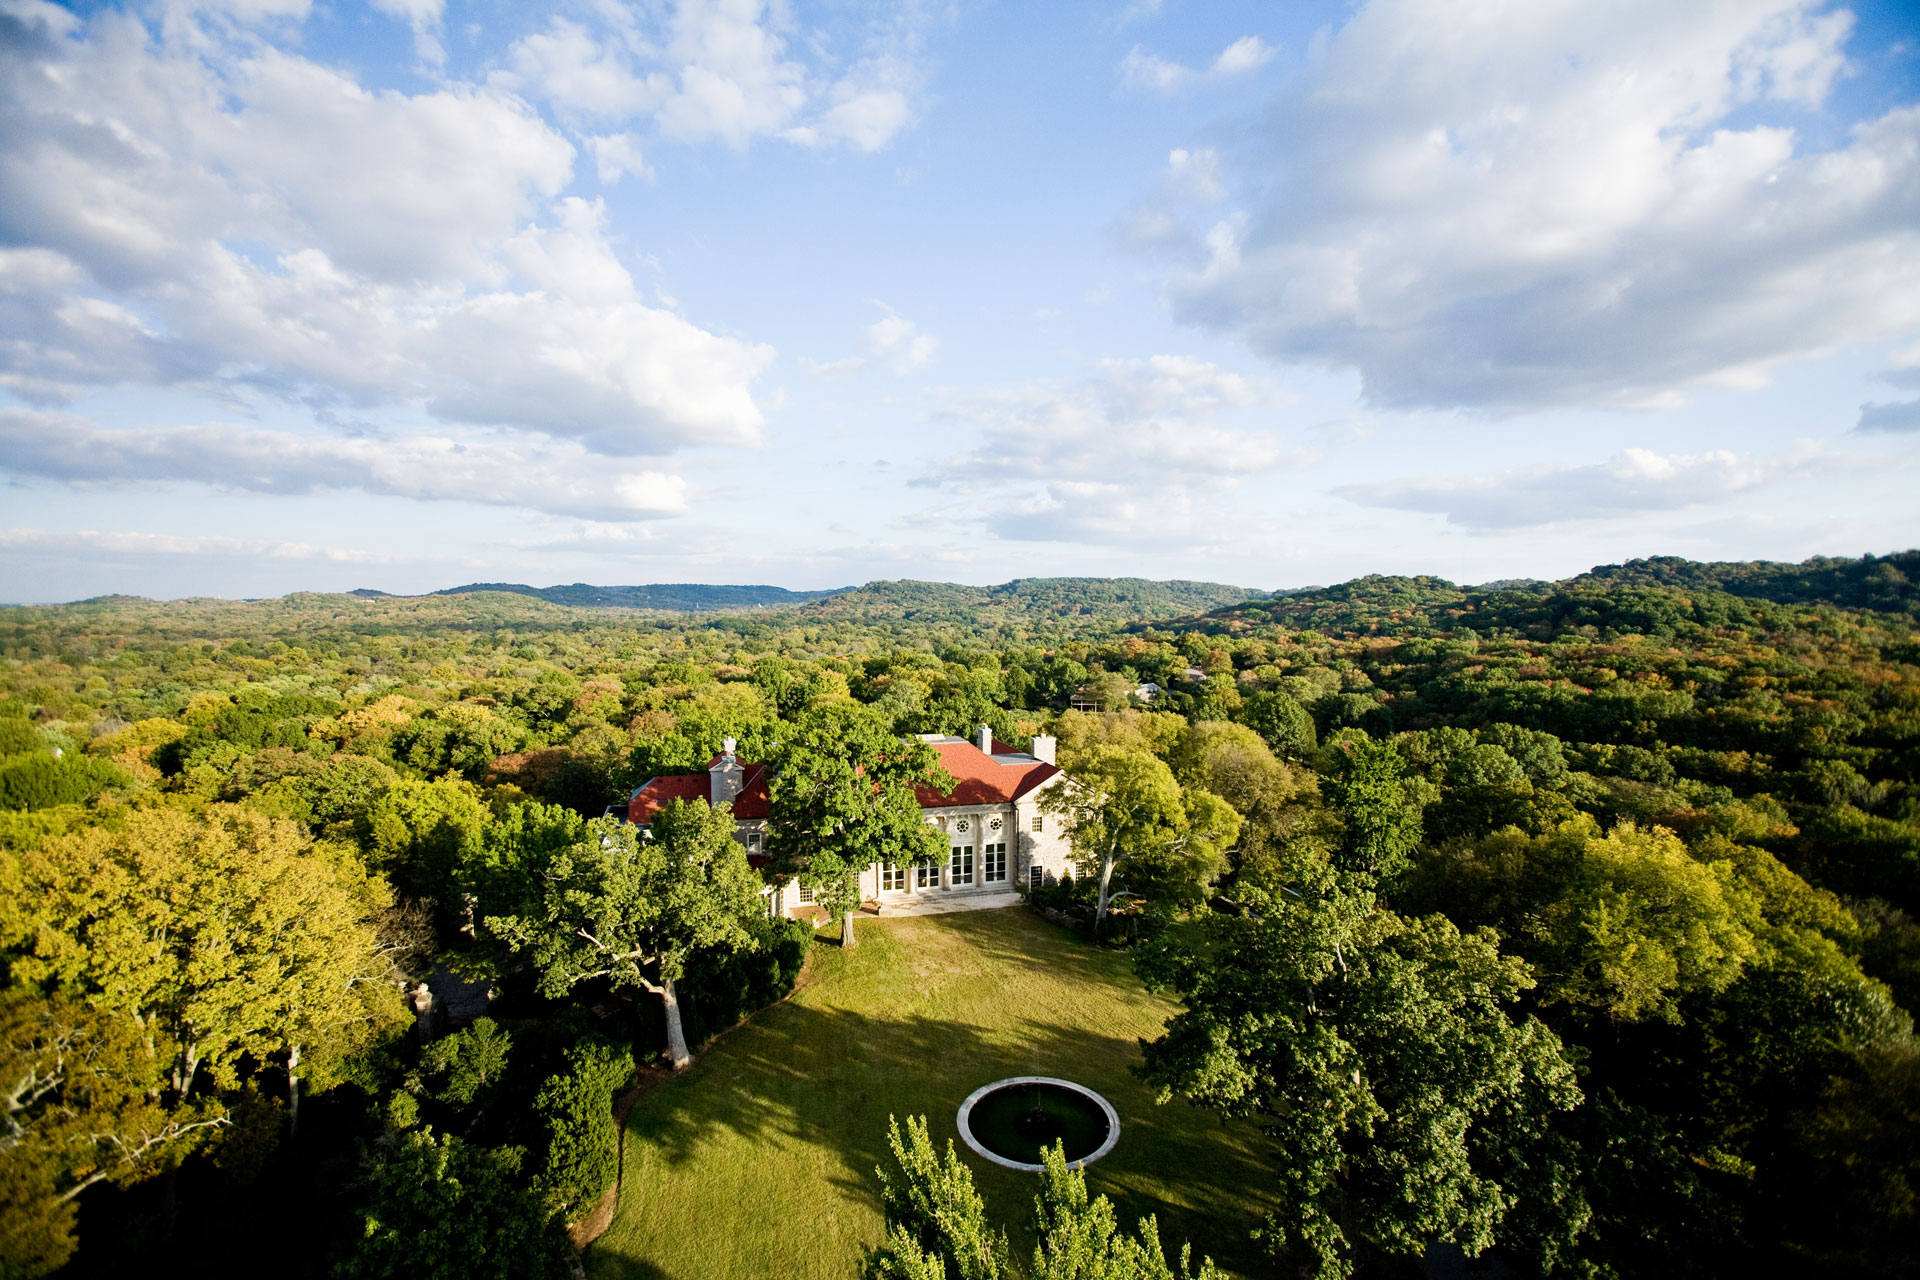 A 55-acre American Country Place Era estate